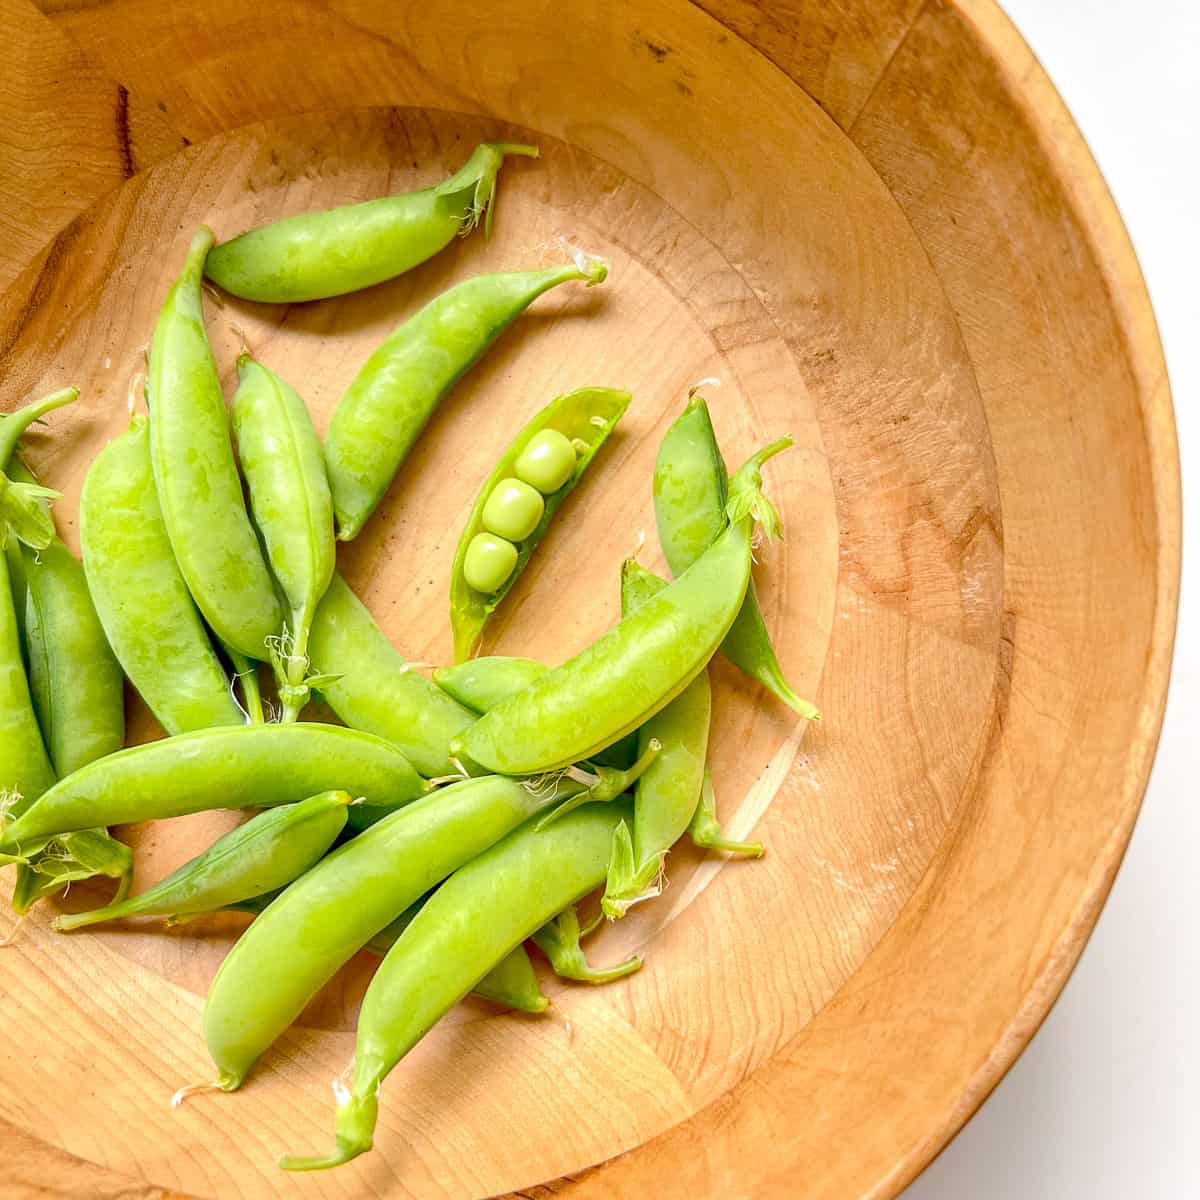 A bowl filled with shelling peas.